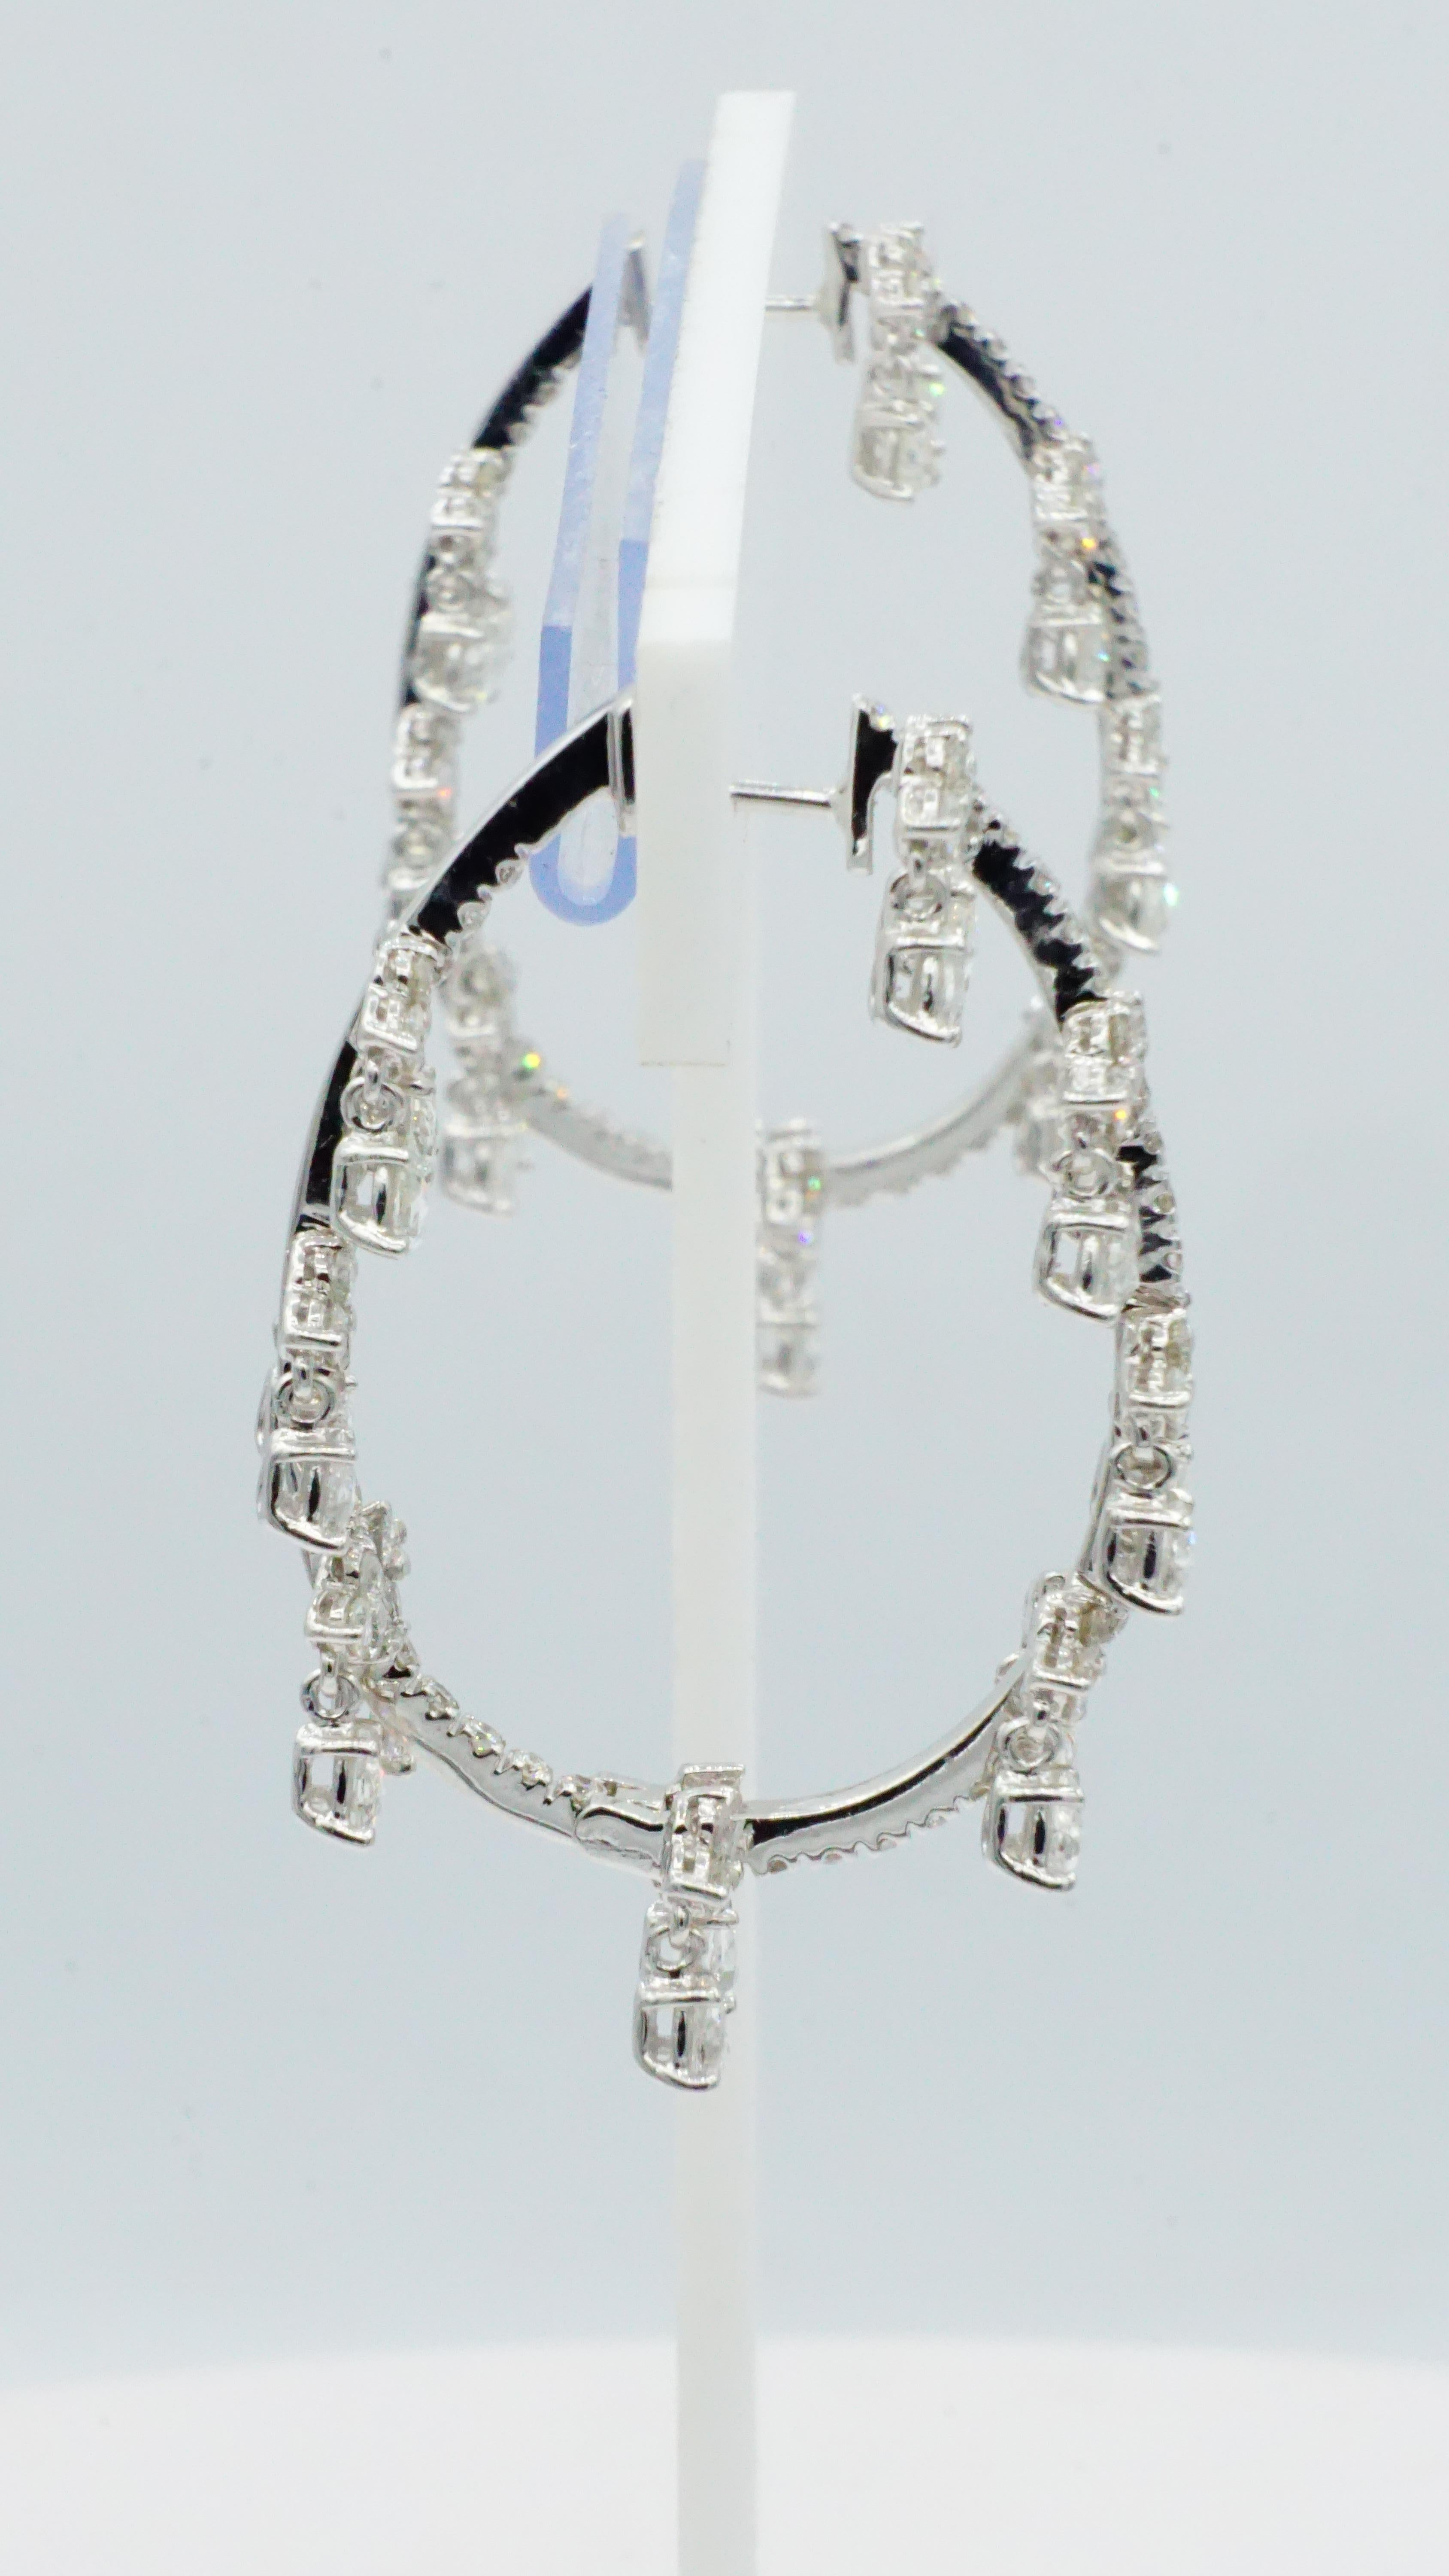 Beautifully-crafted 18kt white gold, hinged oval dangle-style, inside-out diamond hoop earrings. Each earring is 1.5 inches long and 1 inch wide. These earrings are in very nice like-new condition and timeless addition to any jewelry collection. 